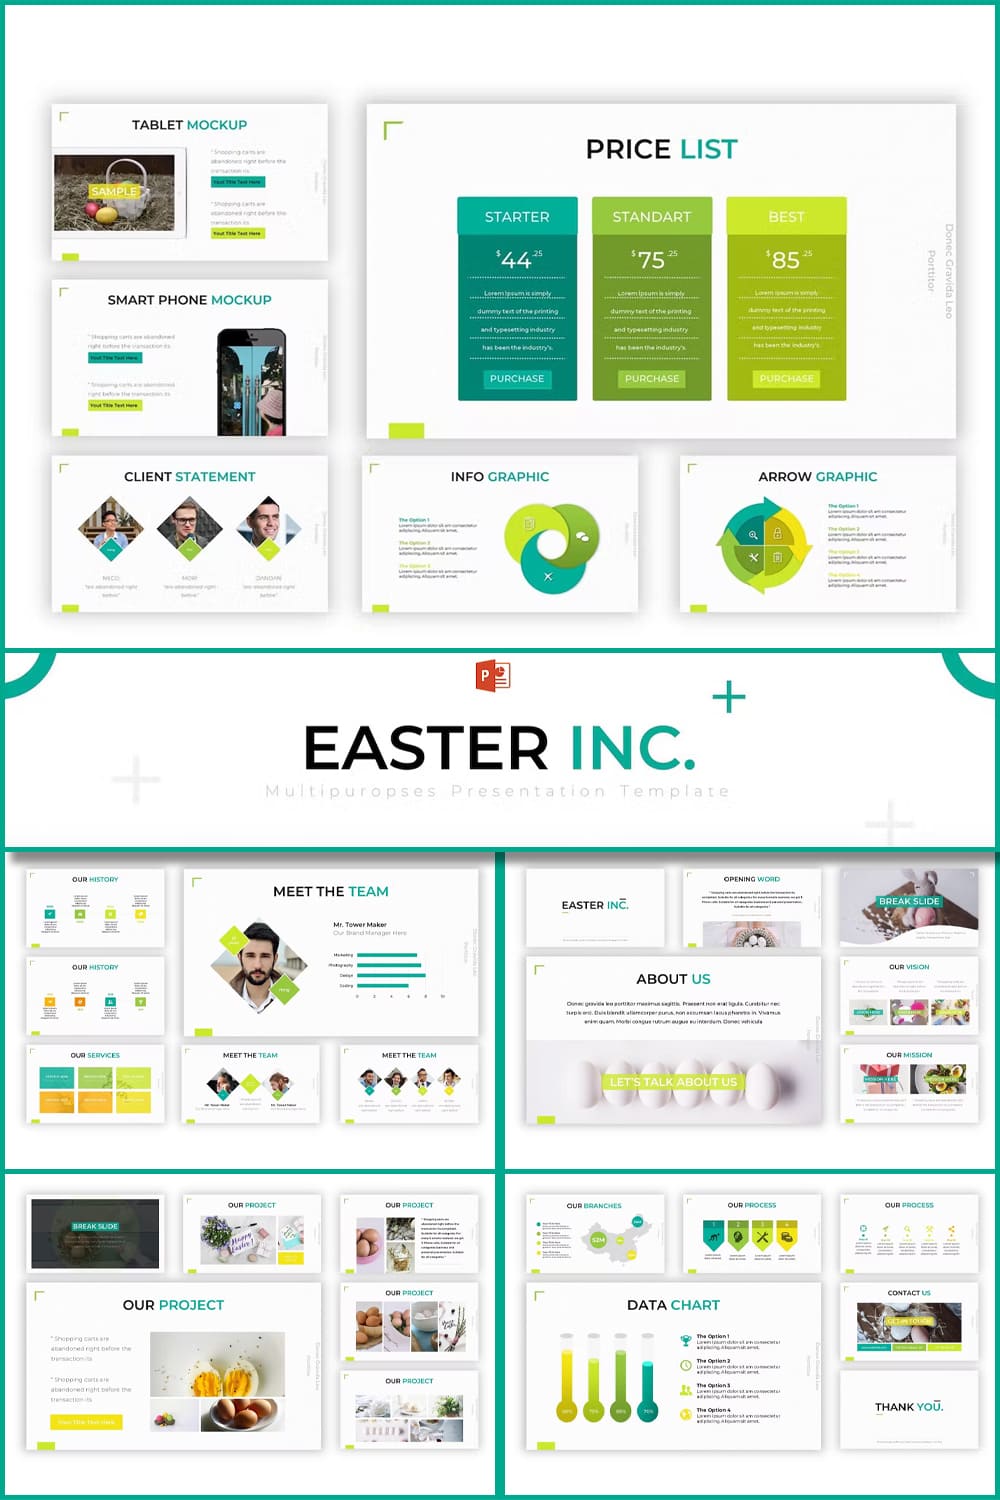 Easter inc powerpoint template - pinterest image preview.